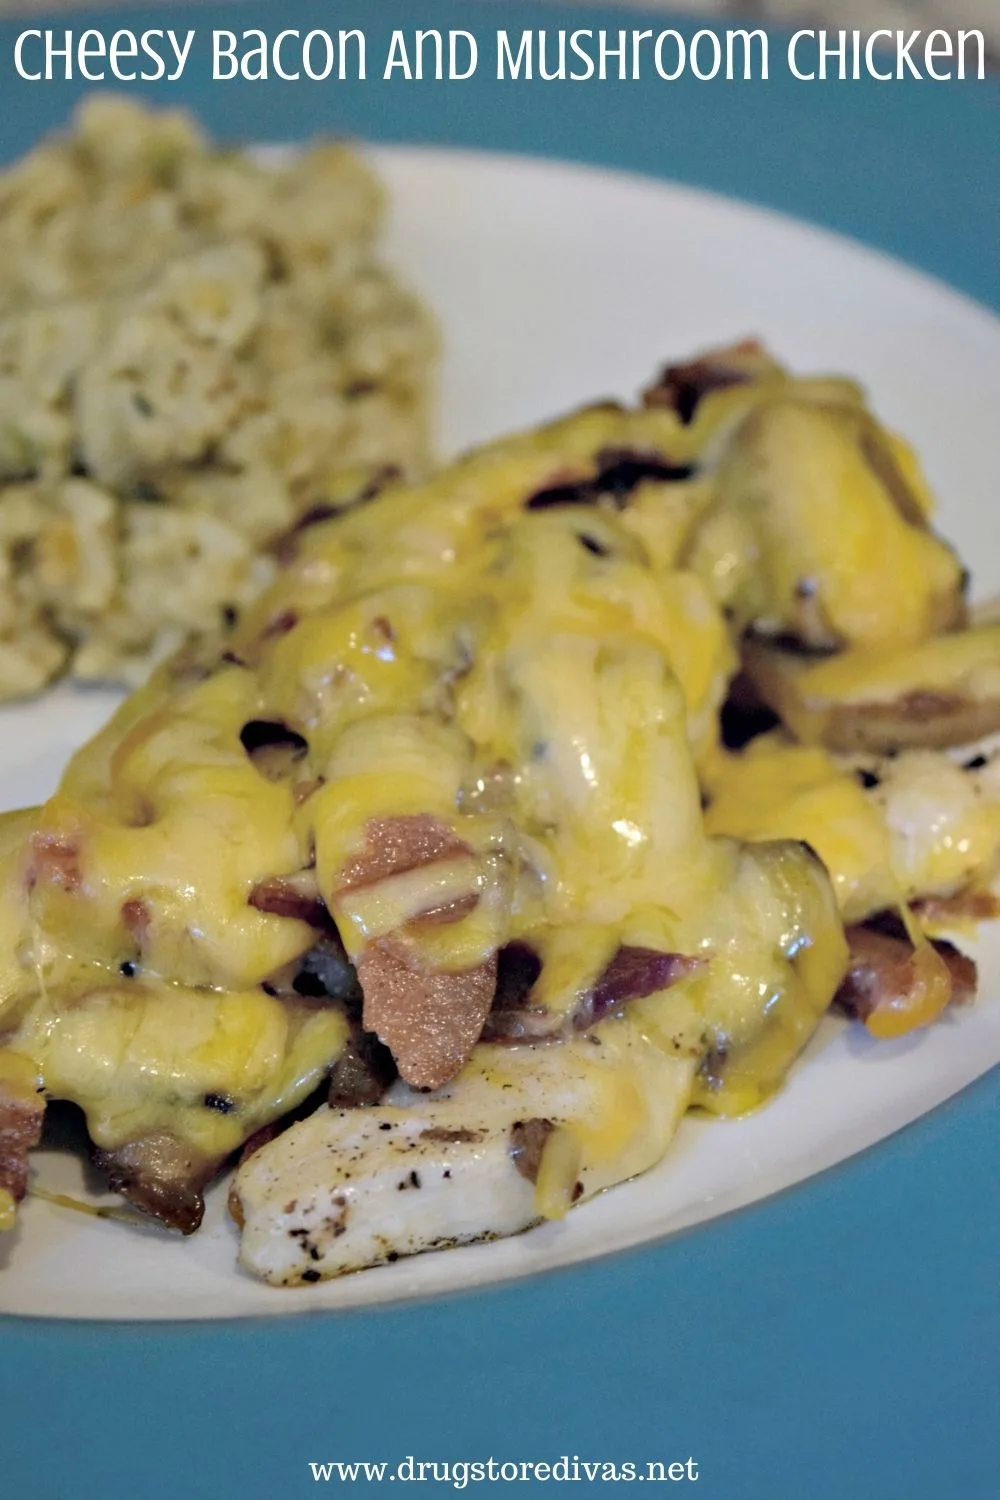 Cheesy Bacon And Mushroom Chicken on a plate with rice.